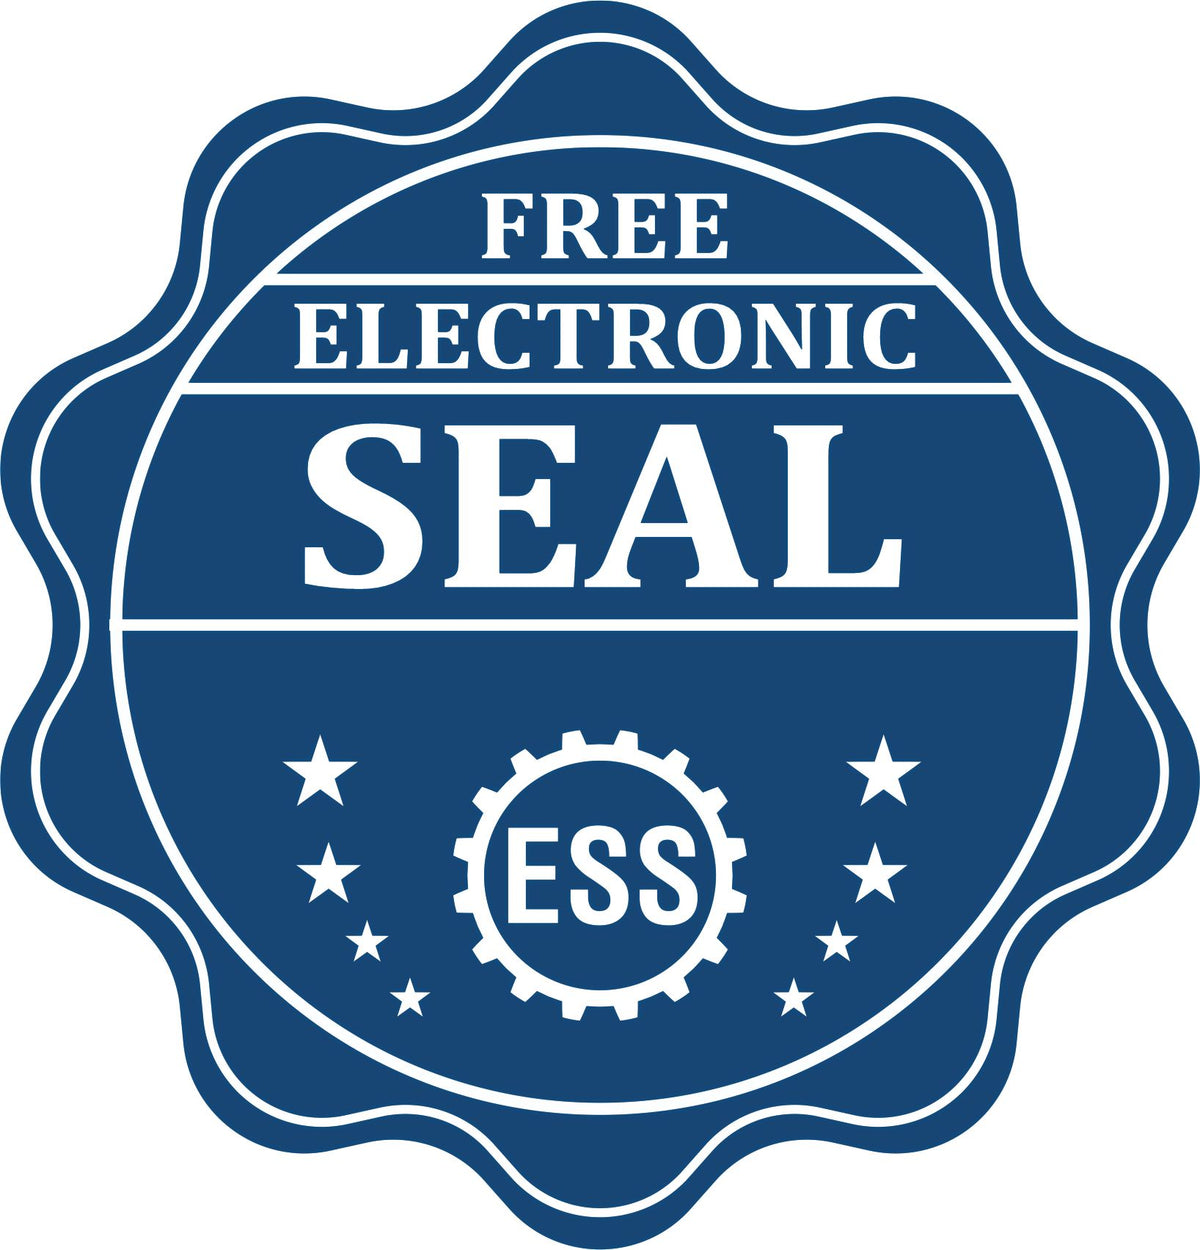 A badge showing a free electronic seal for the Soft Louisiana Professional Engineer Seal with stars and the ESS gear on the emblem.